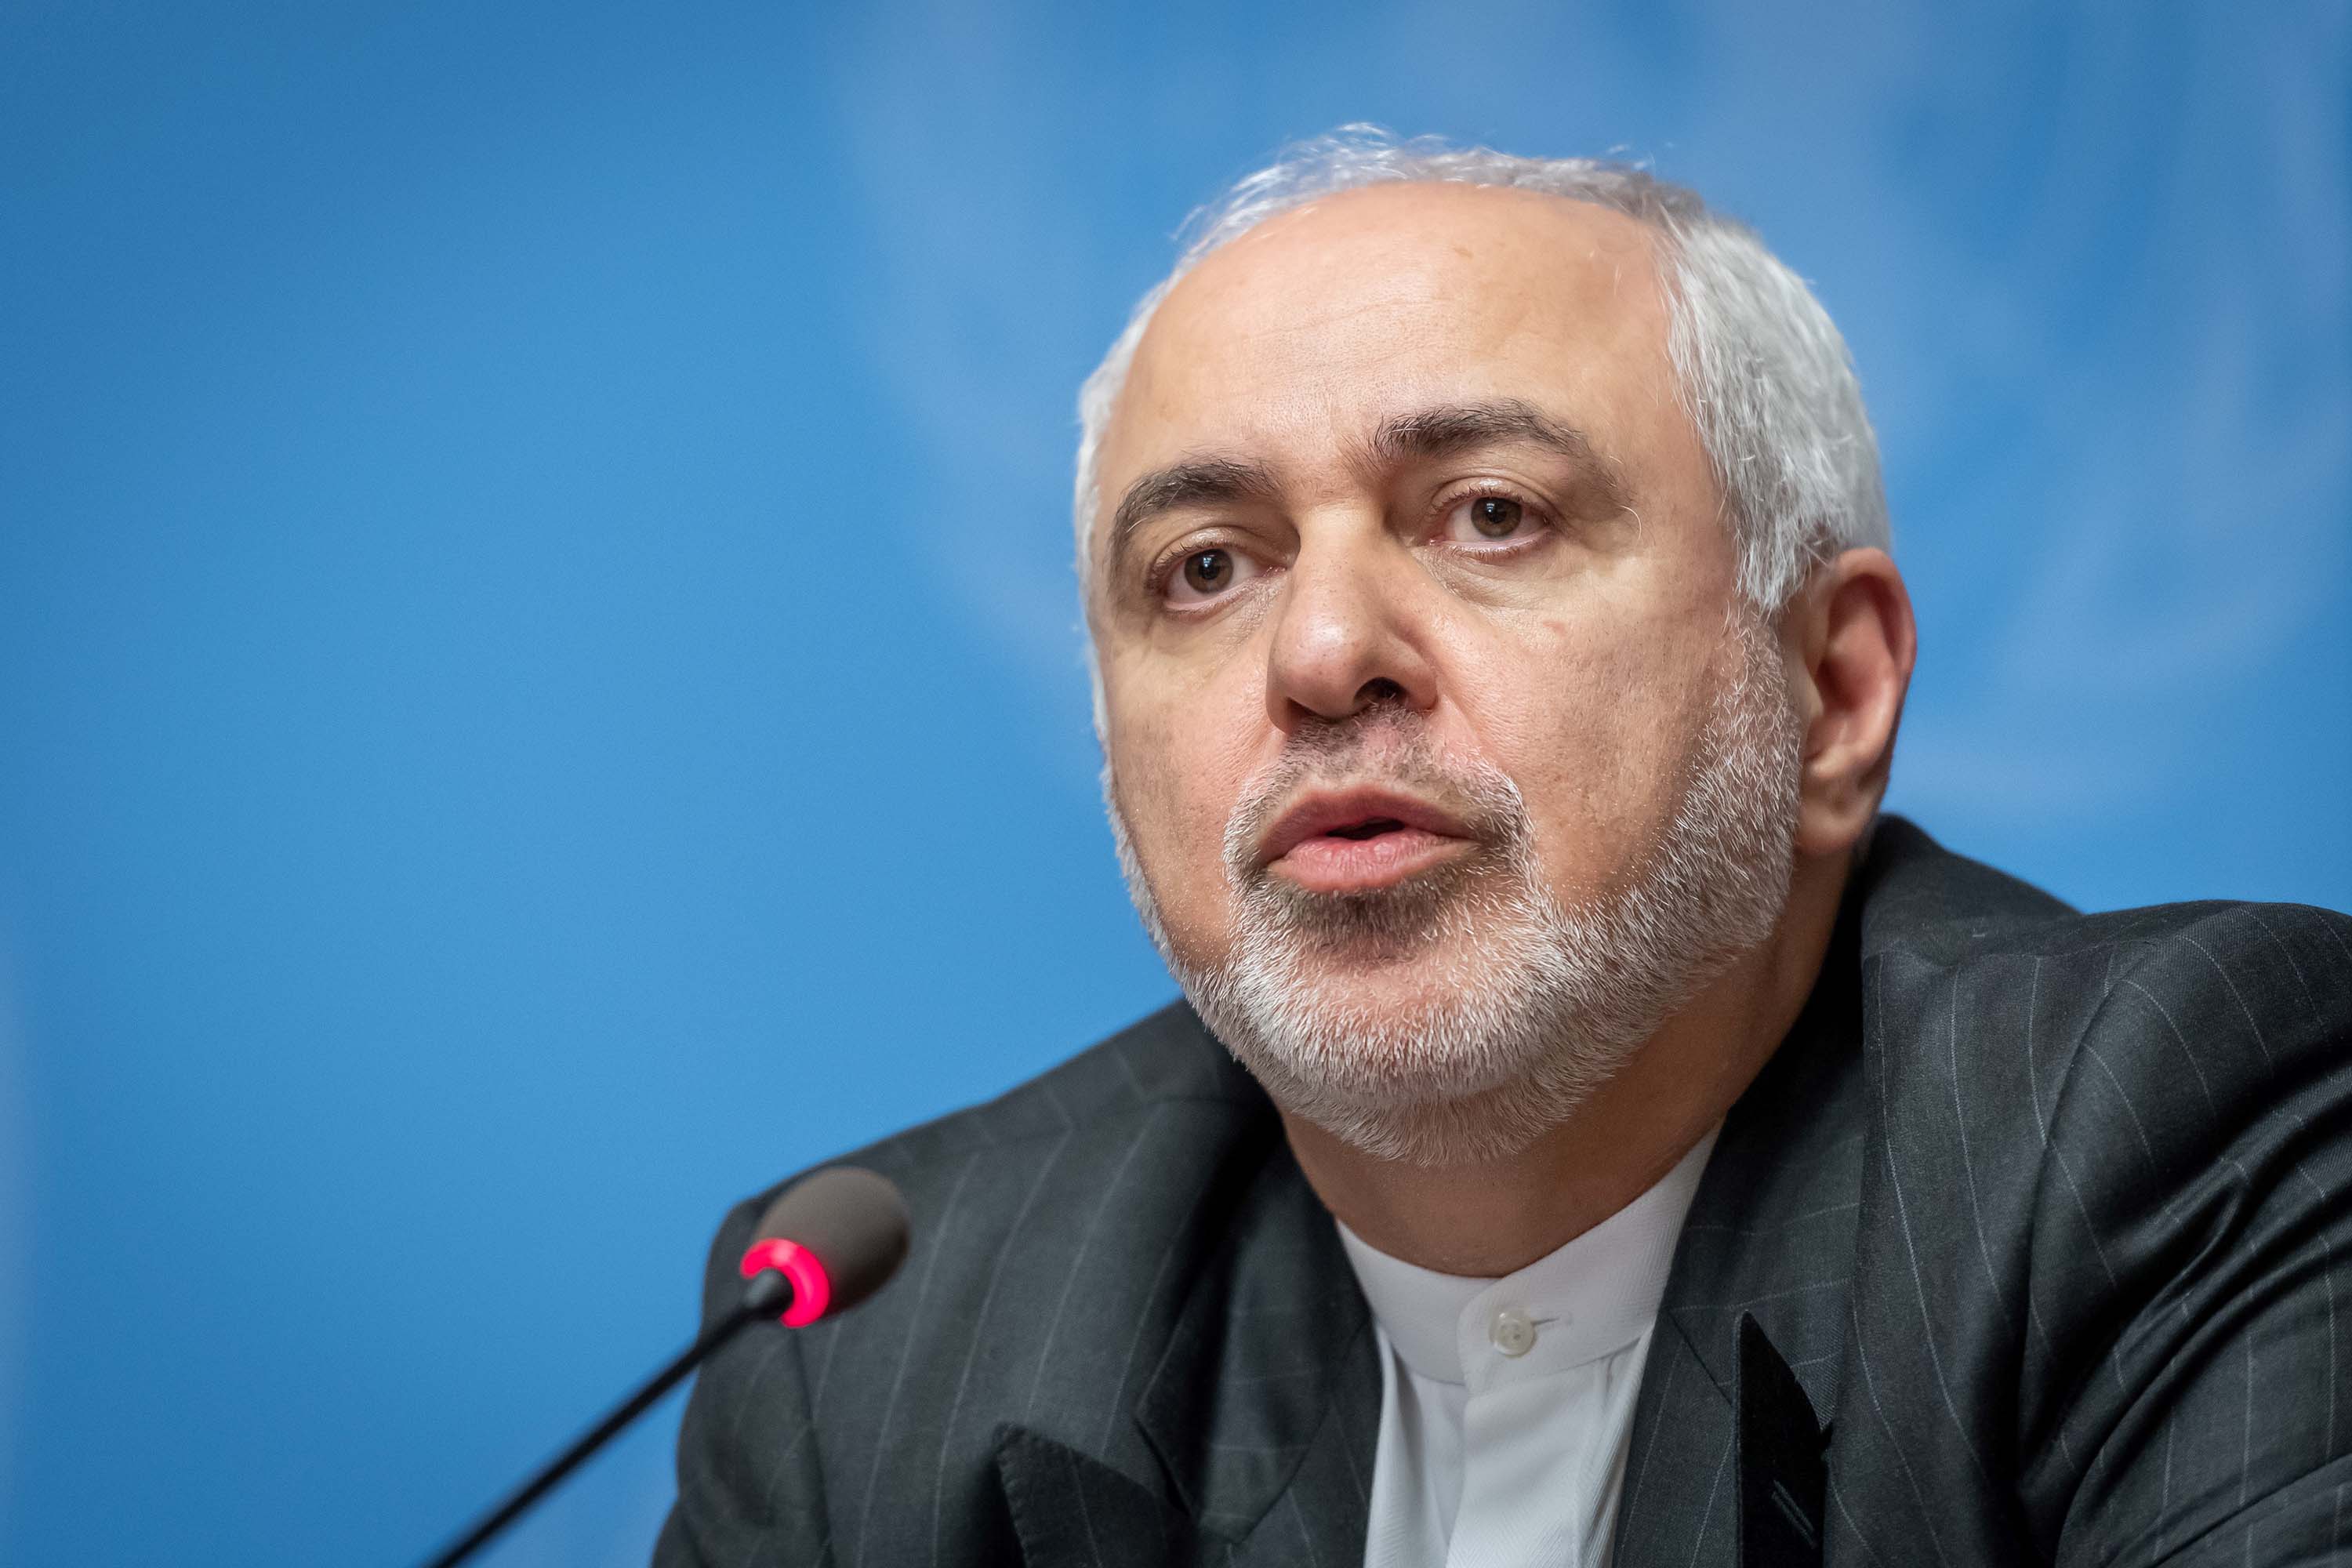 Iranian Foreign Minister Mohammad Javad Zarif speaks at a press conference in Geneva, Switzerland, in October last year. Credit: Fabrice Coffrini/AFP via Getty Images